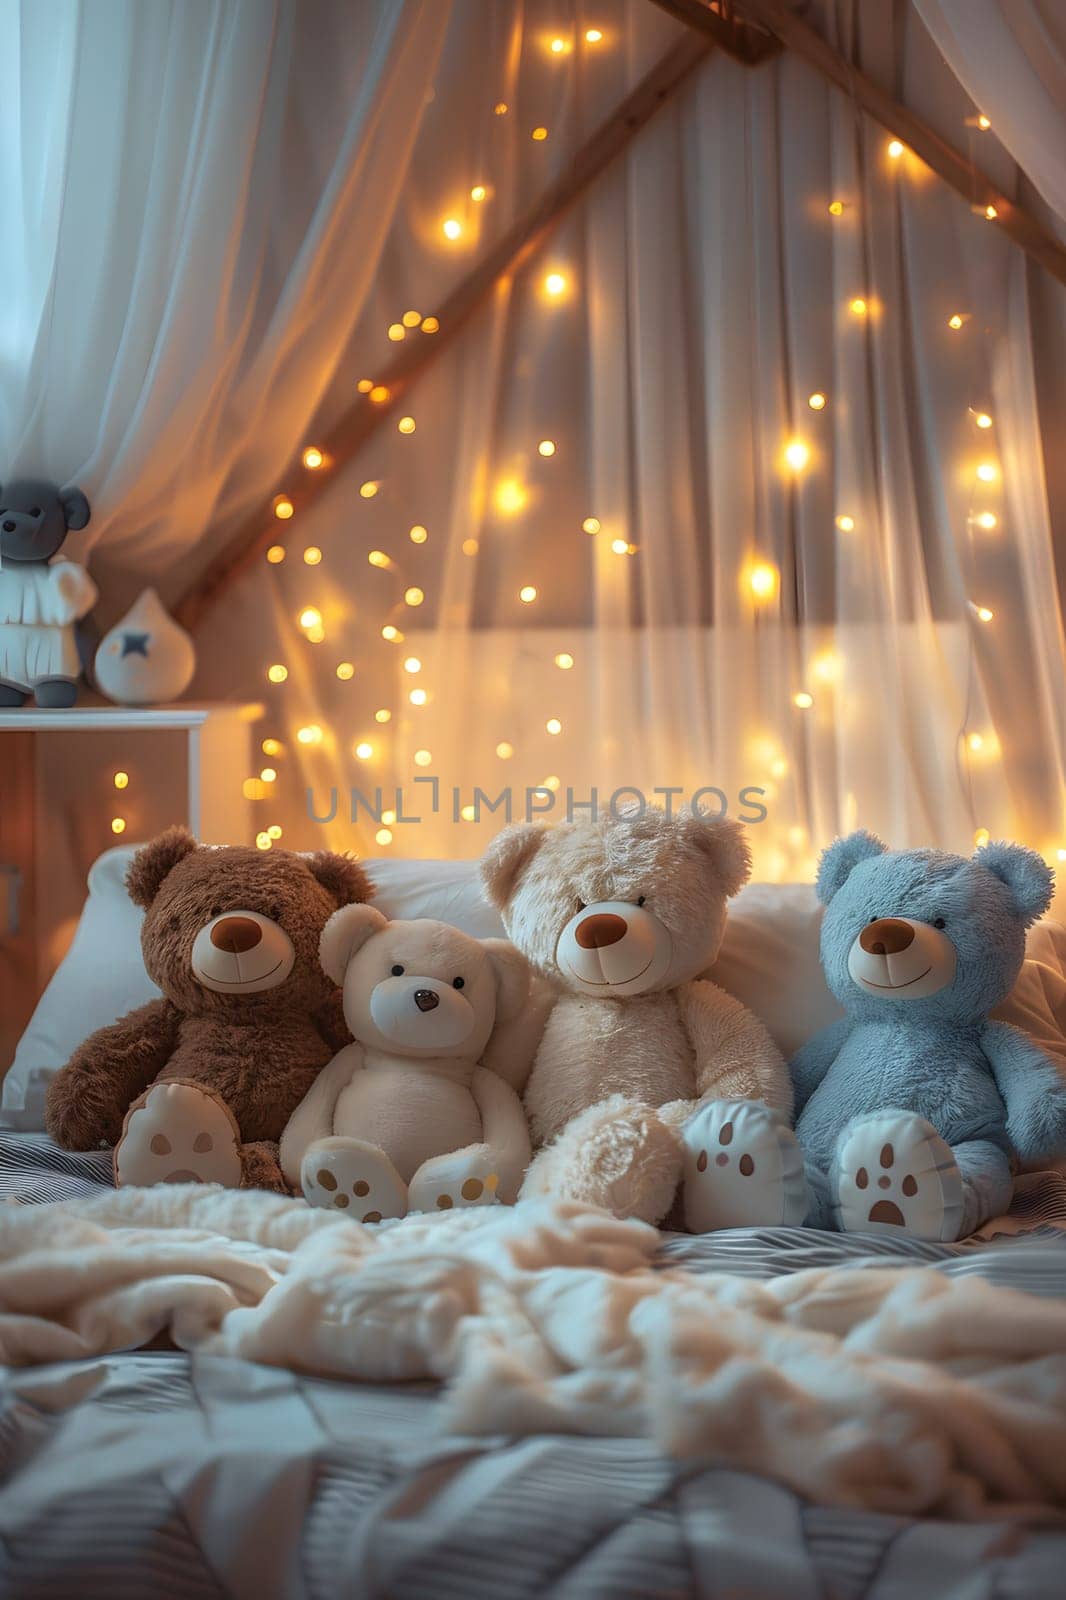 A group of plush teddy bears, with soft fur, sitting on top of a bed, adding a touch of interior design to the room. The toys are surrounded by curtains, creating a cozy atmosphere